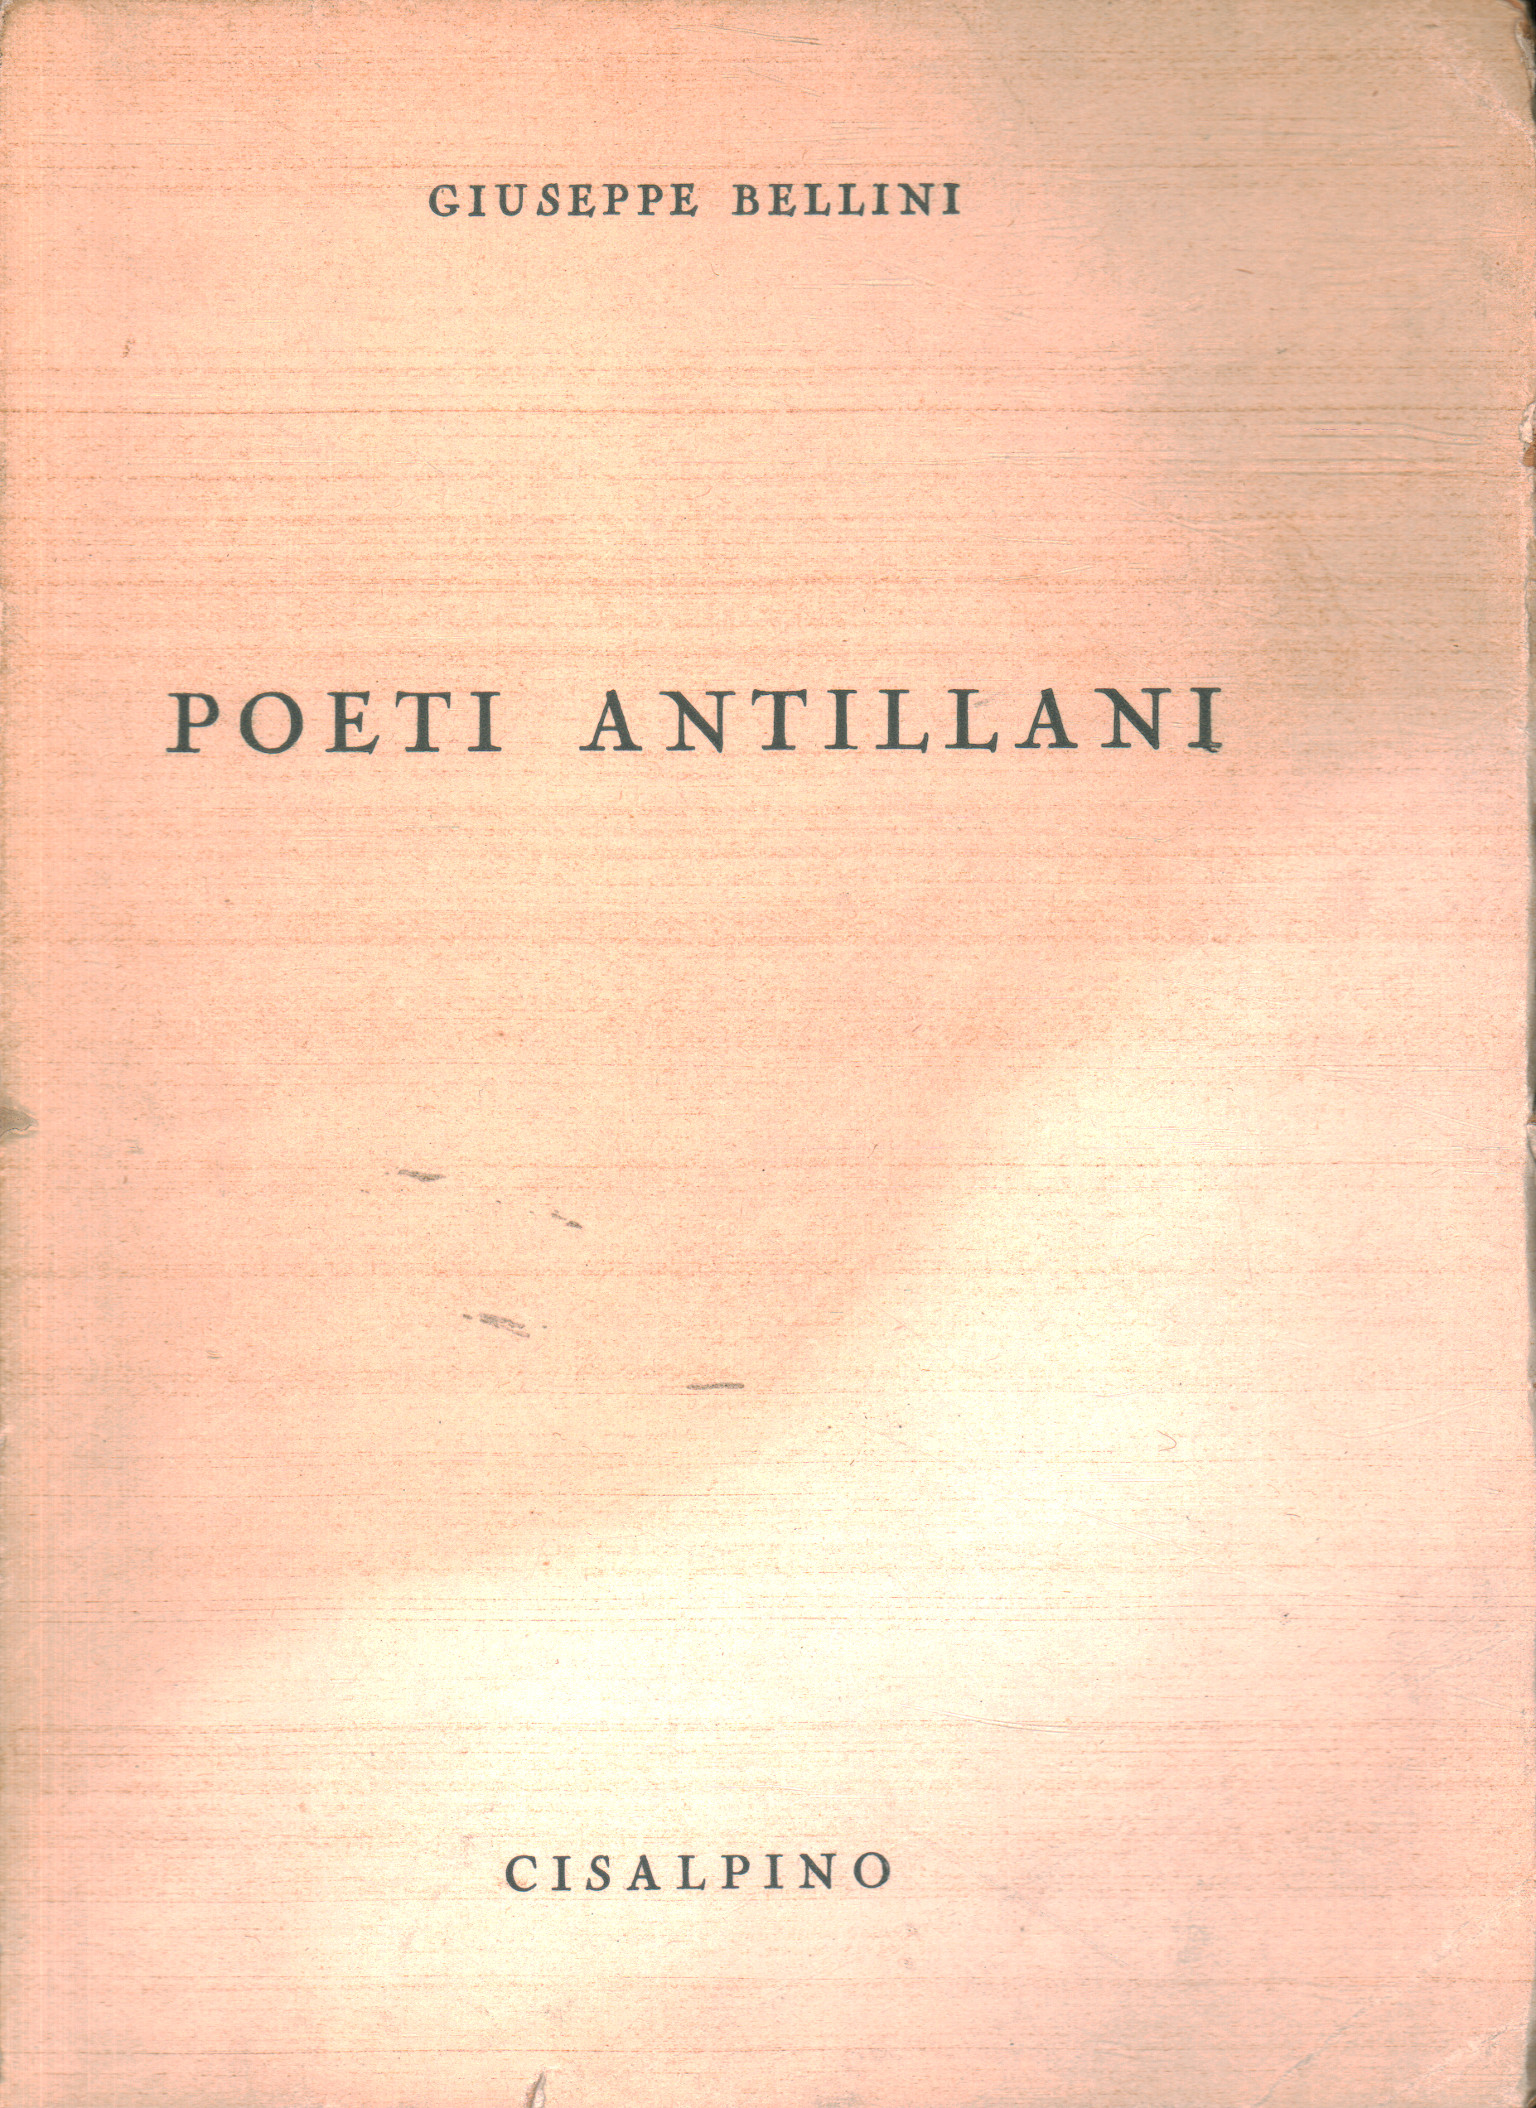 Poets of the antilles, Giuseppe Bellini